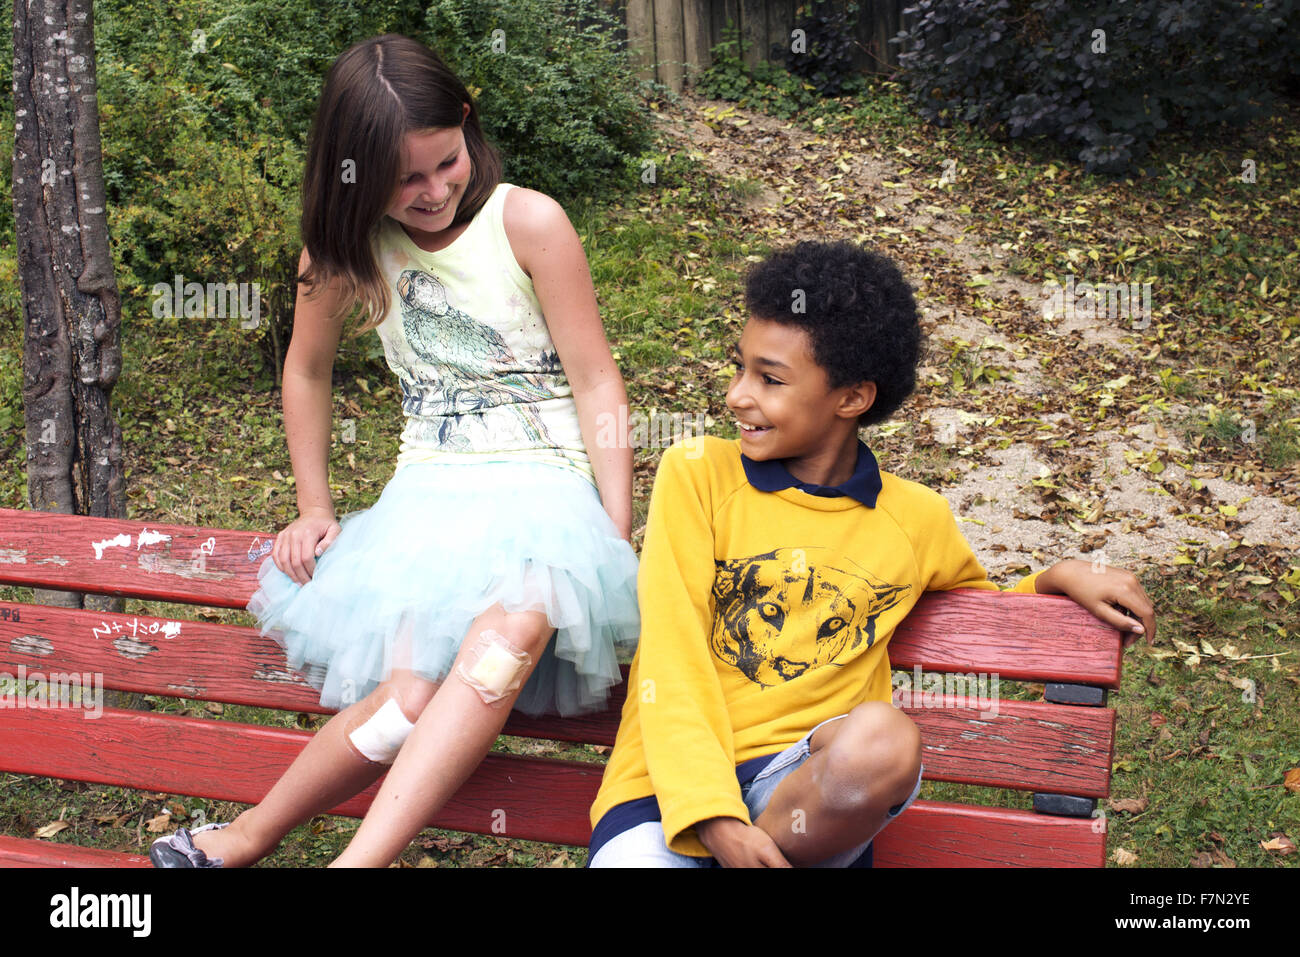 Young friends hanging out together on park bench Stock Photo